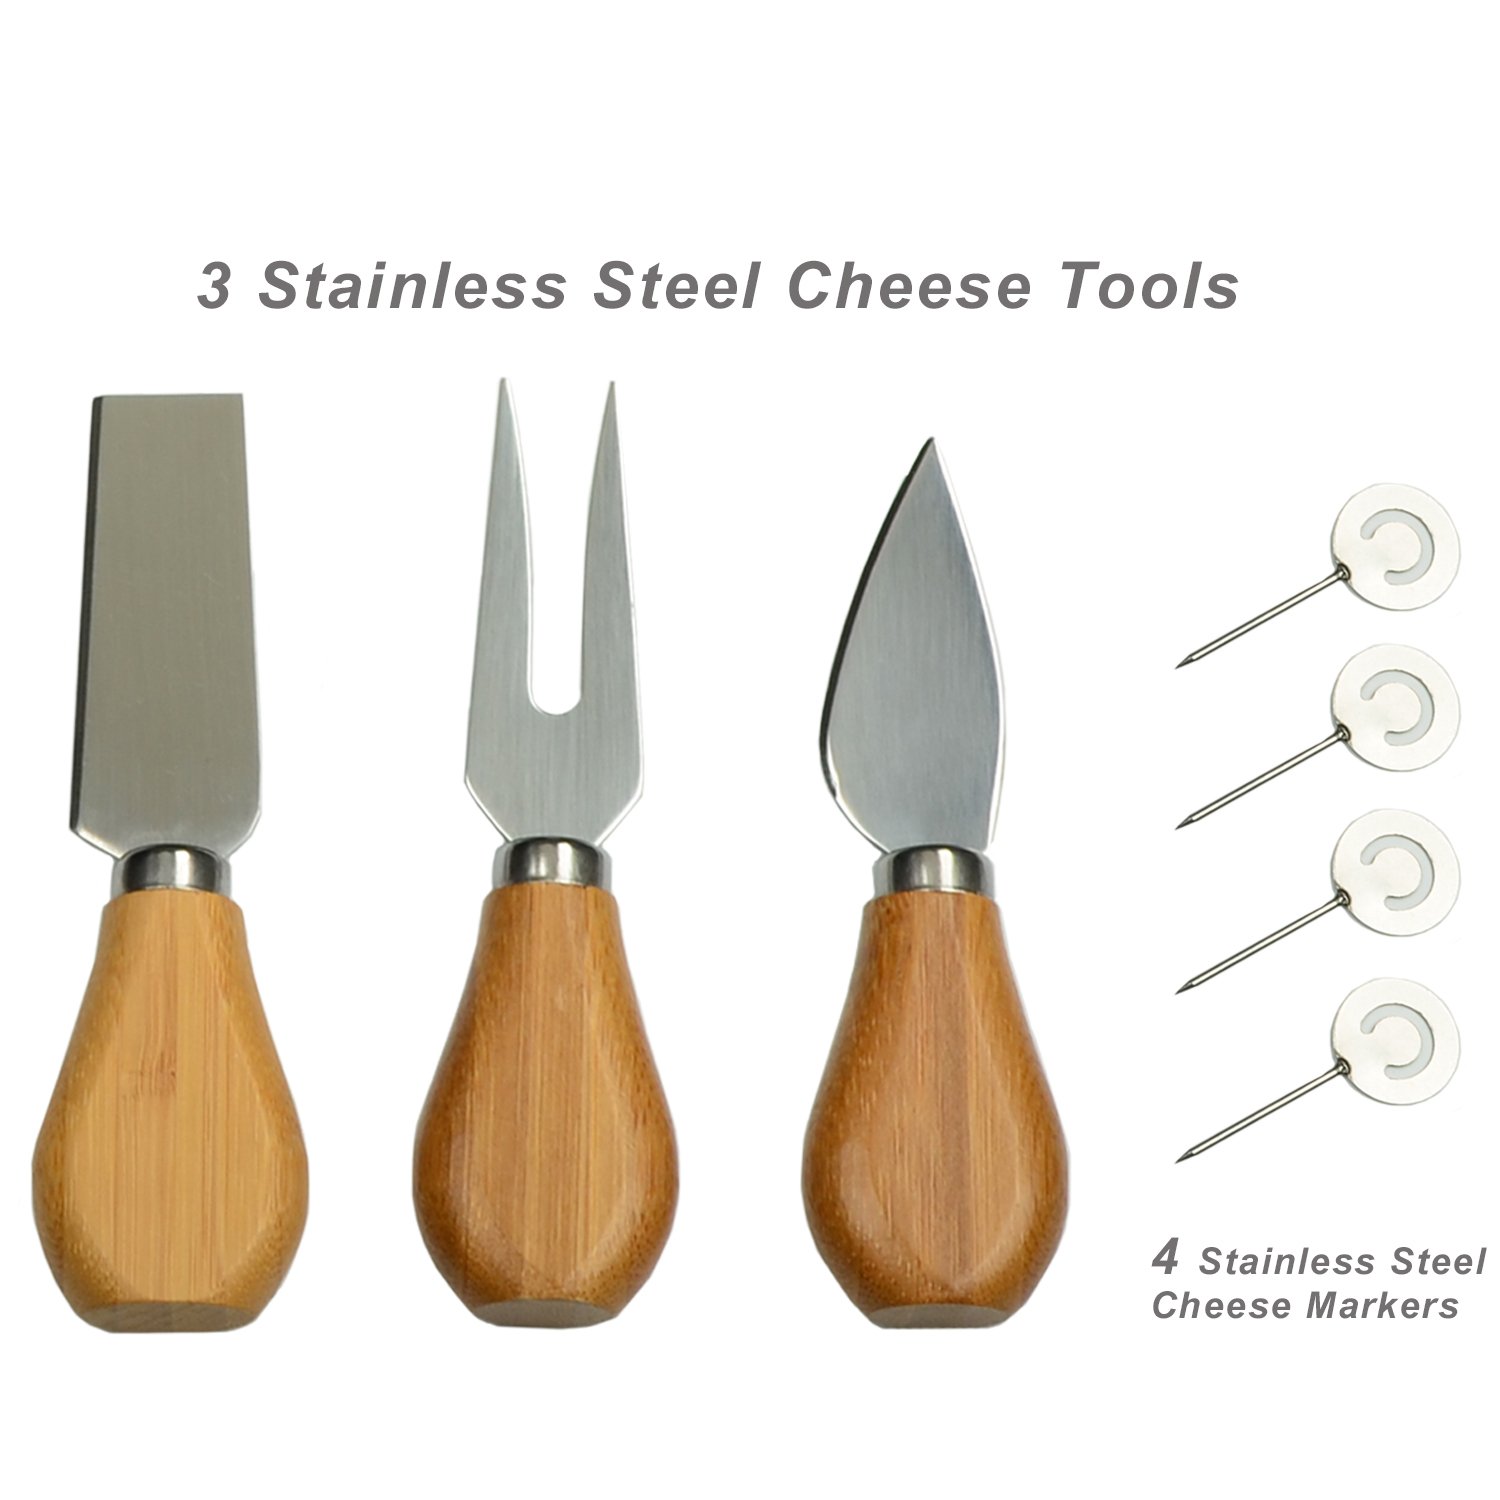 Round Bamboo Cheese Board Set with 3 Stainless Steel Tools and 4 Cheese Markers - 9" Diameter x 1.5" high